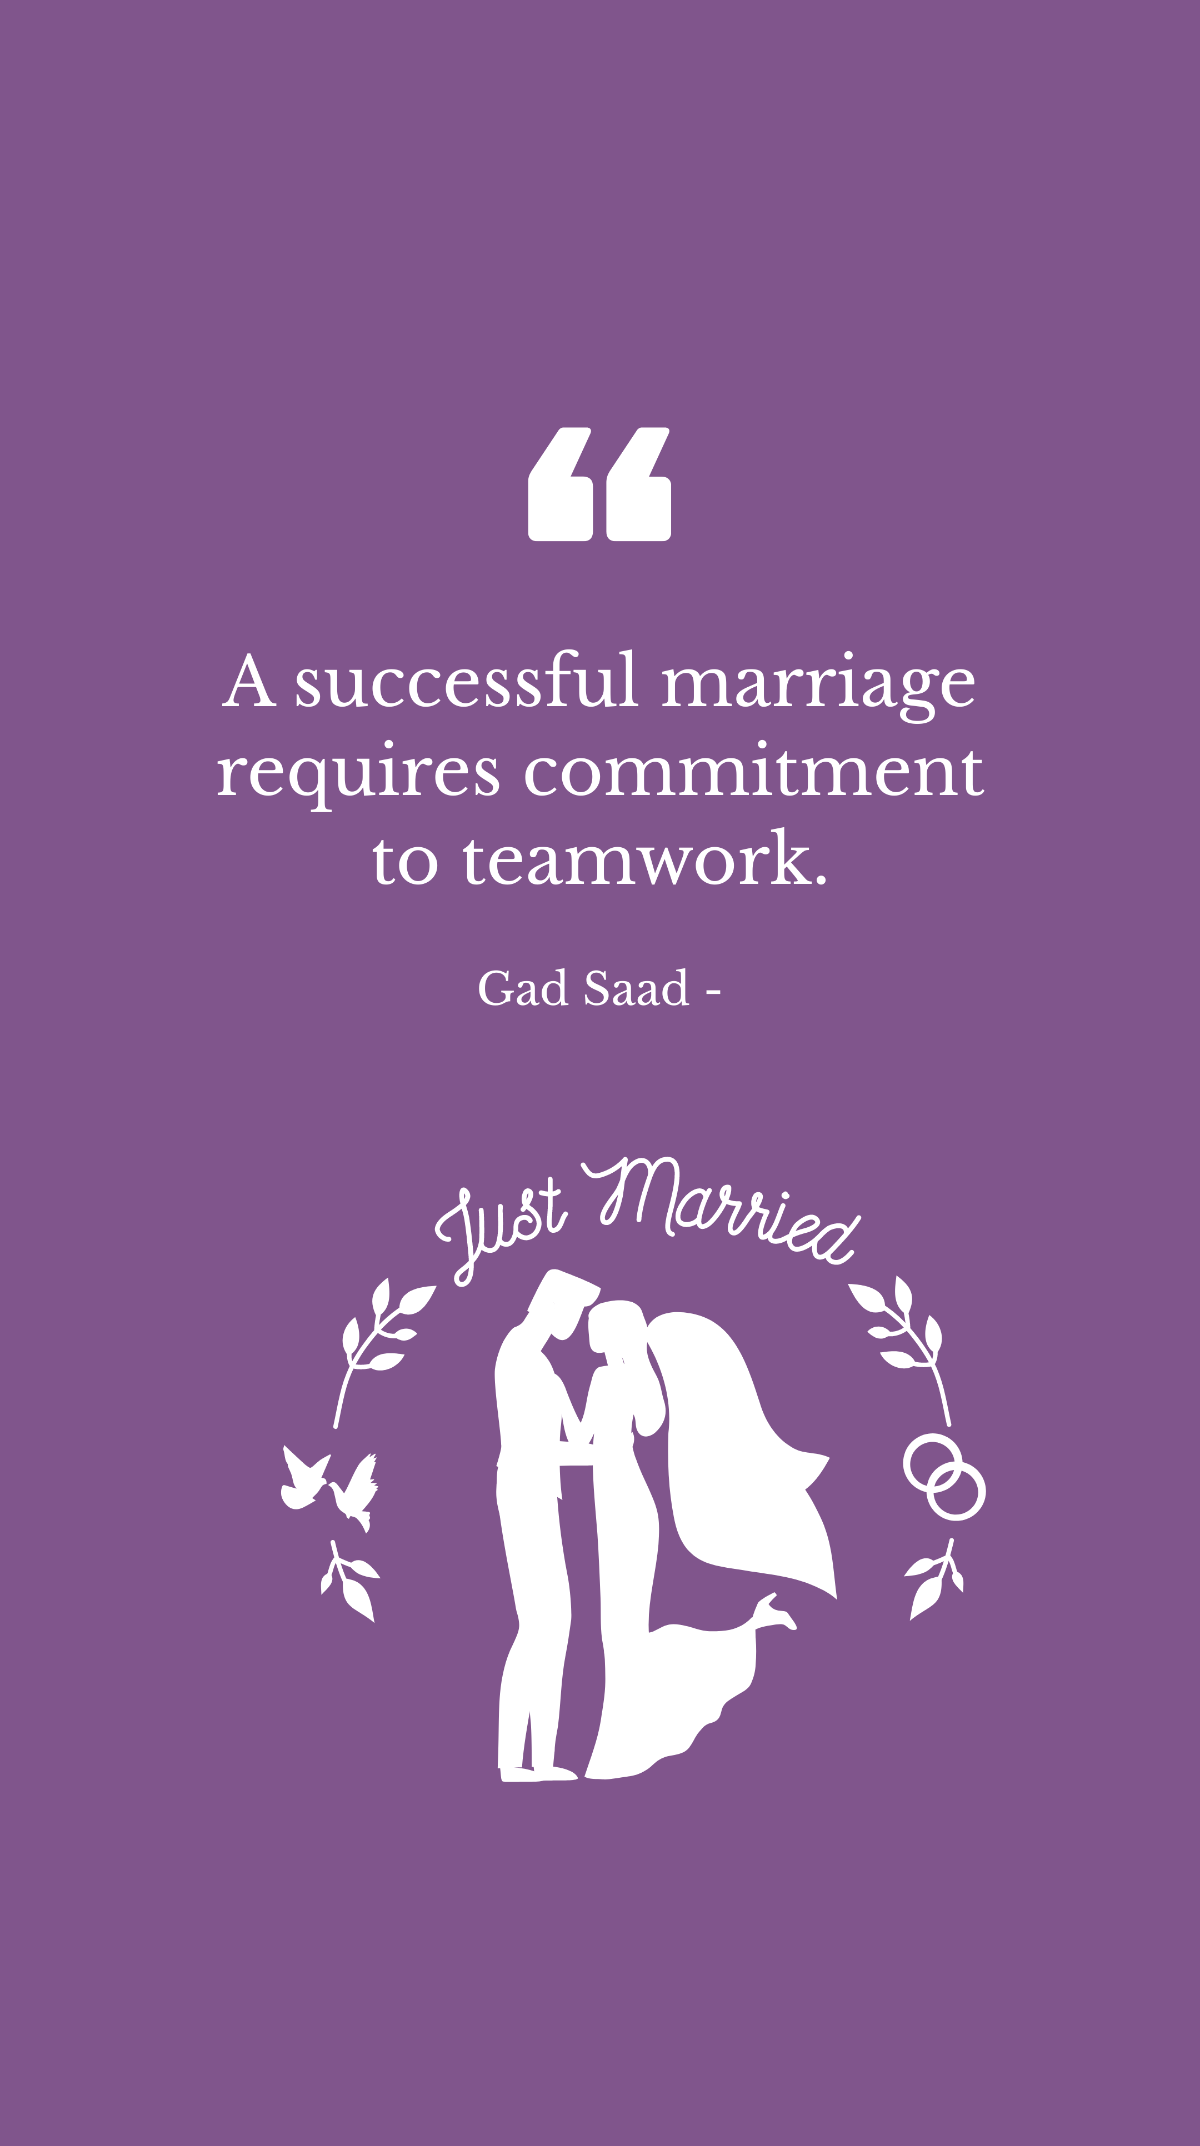 Free Gad Saad - A successful marriage requires commitment to teamwork. Template